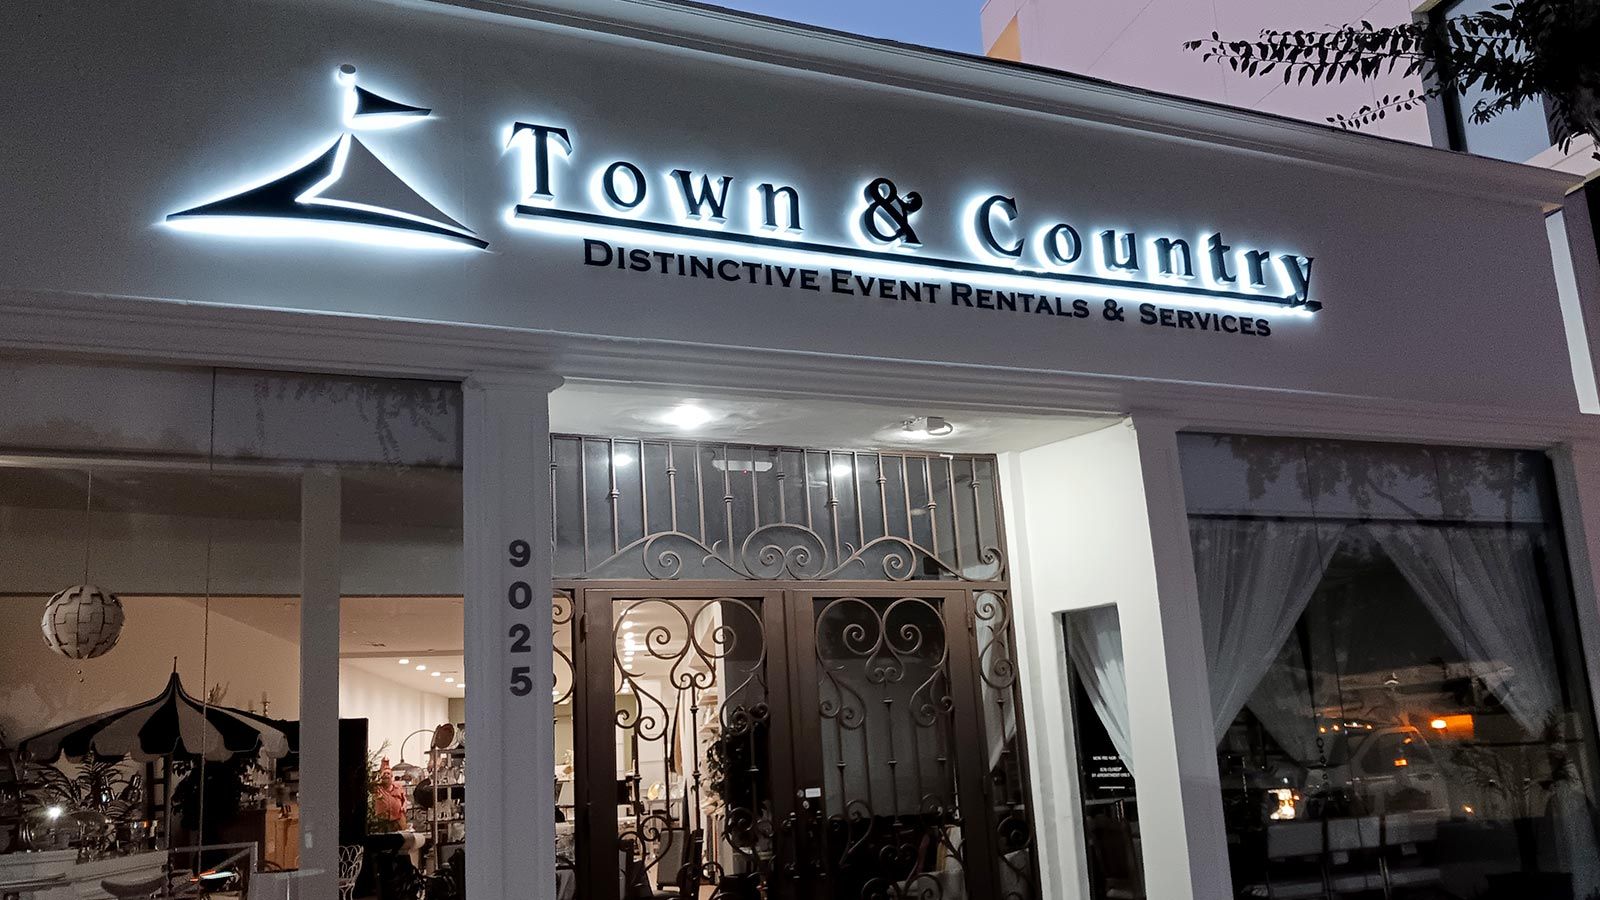 Town & Country 3D sign installed on the building